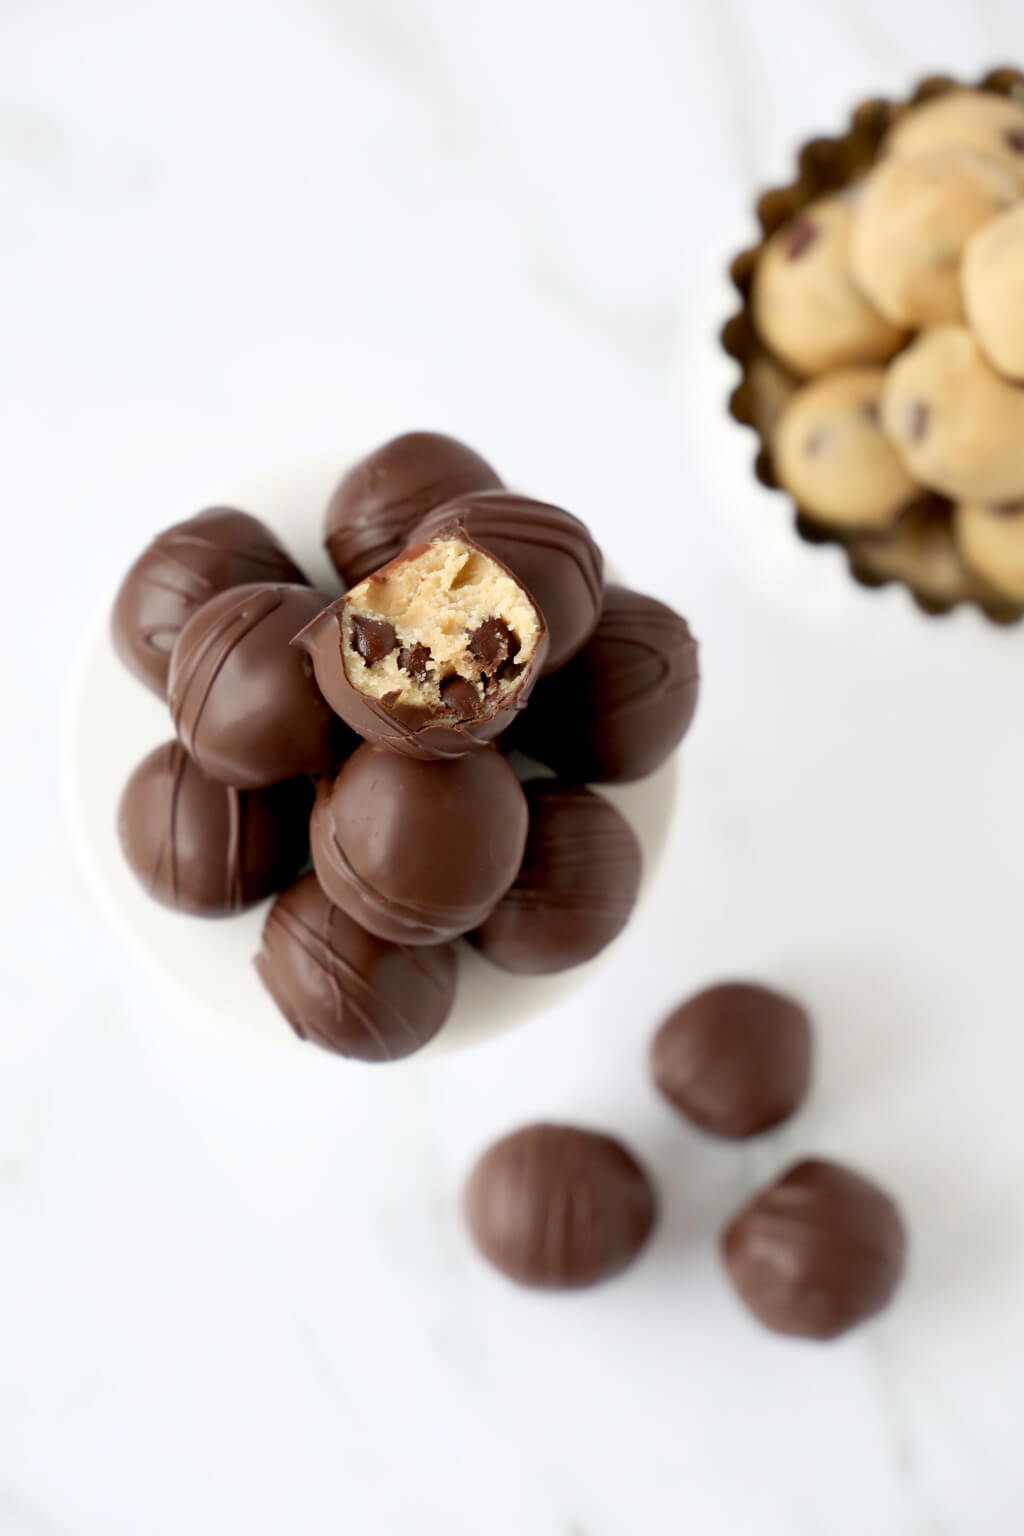 A pile of chocolate cookie dough balls. The very top one has a bite taken out so the cookie dough center is visible.